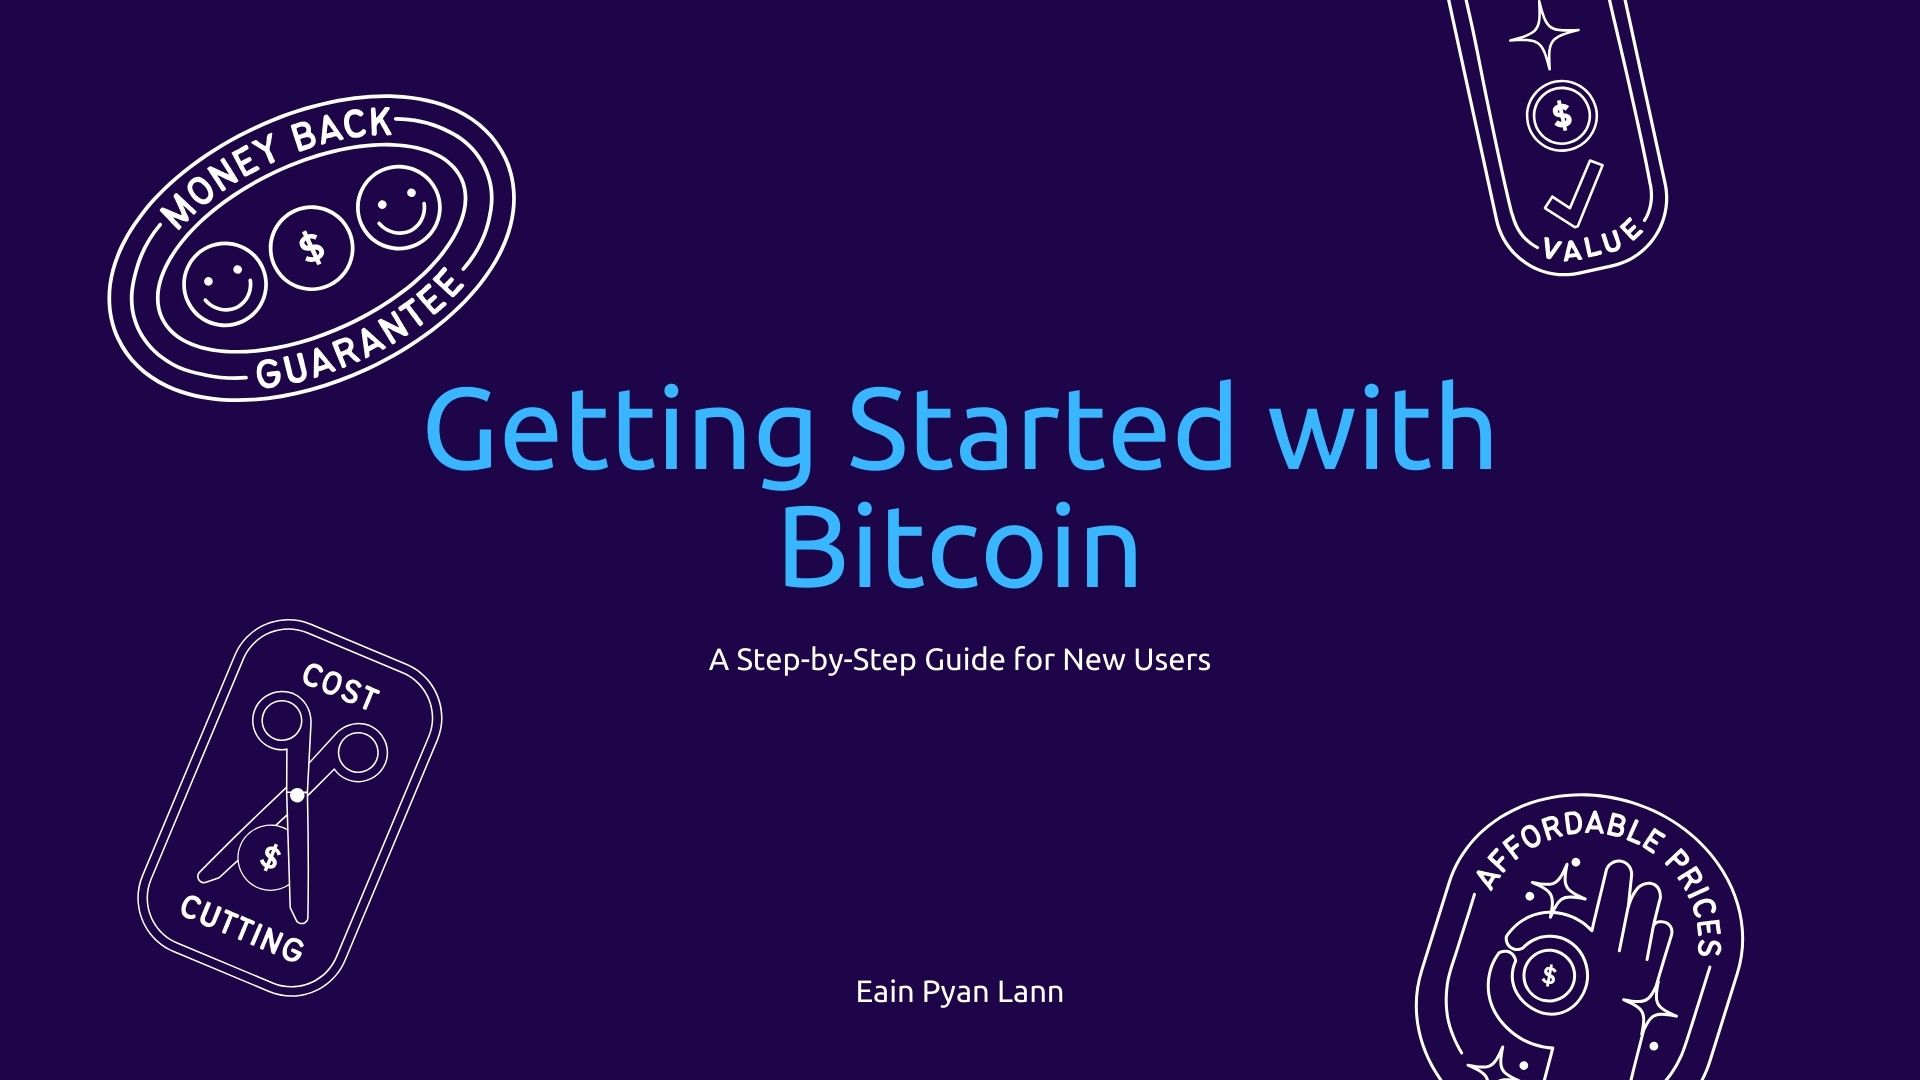 Getting Started with Bitcoin: A Step-by-Step Guide for New Users